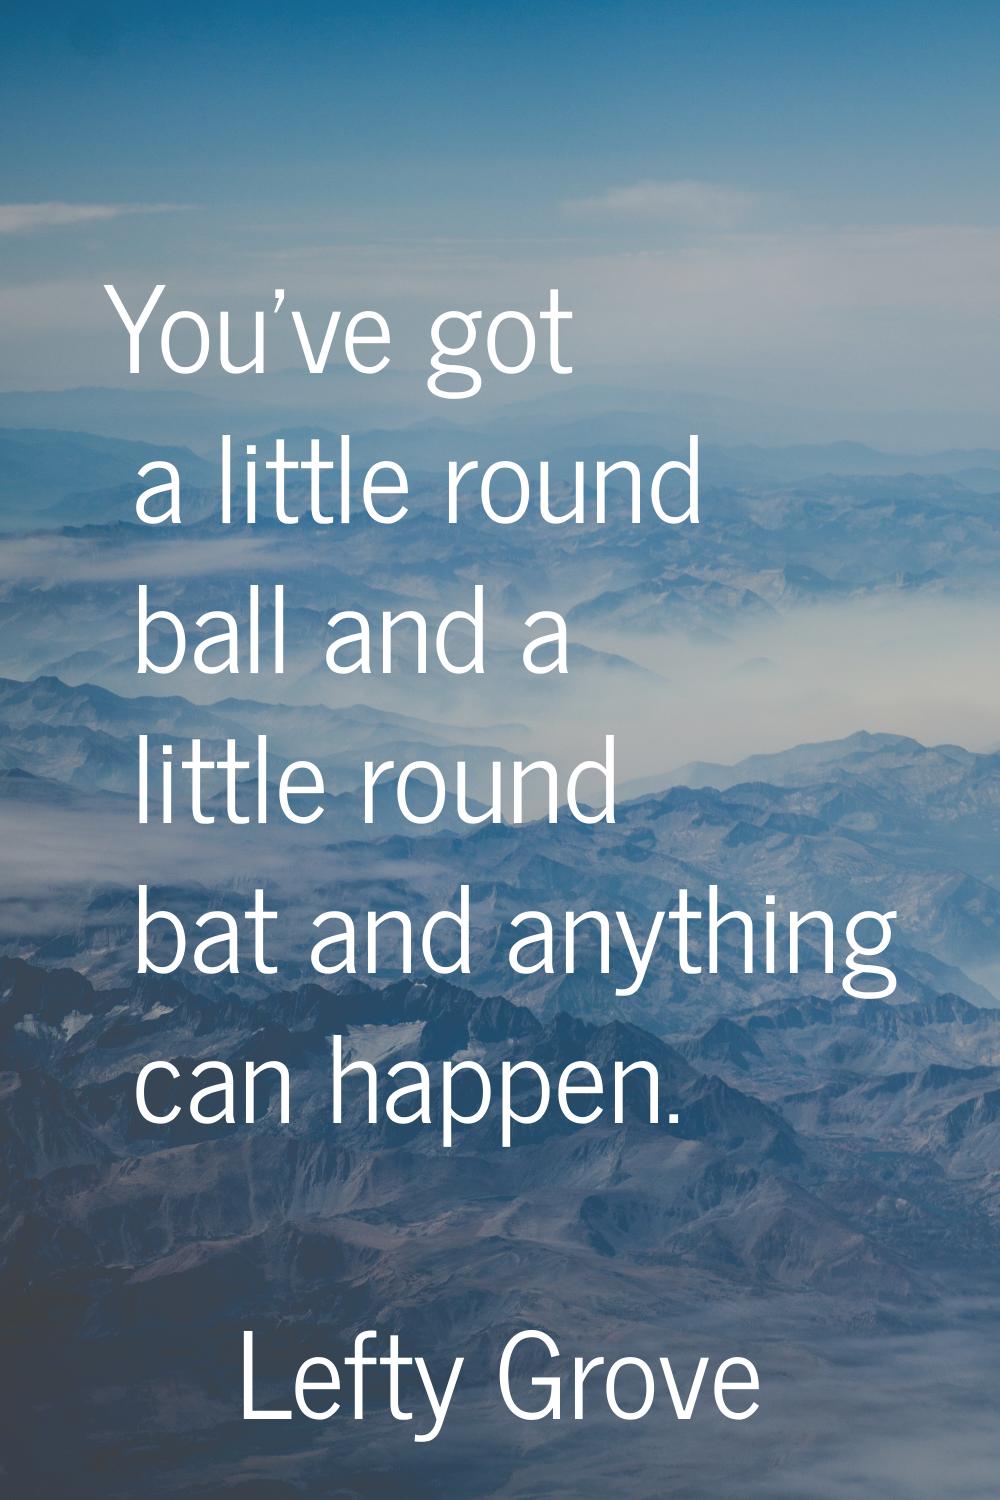 You've got a little round ball and a little round bat and anything can happen.